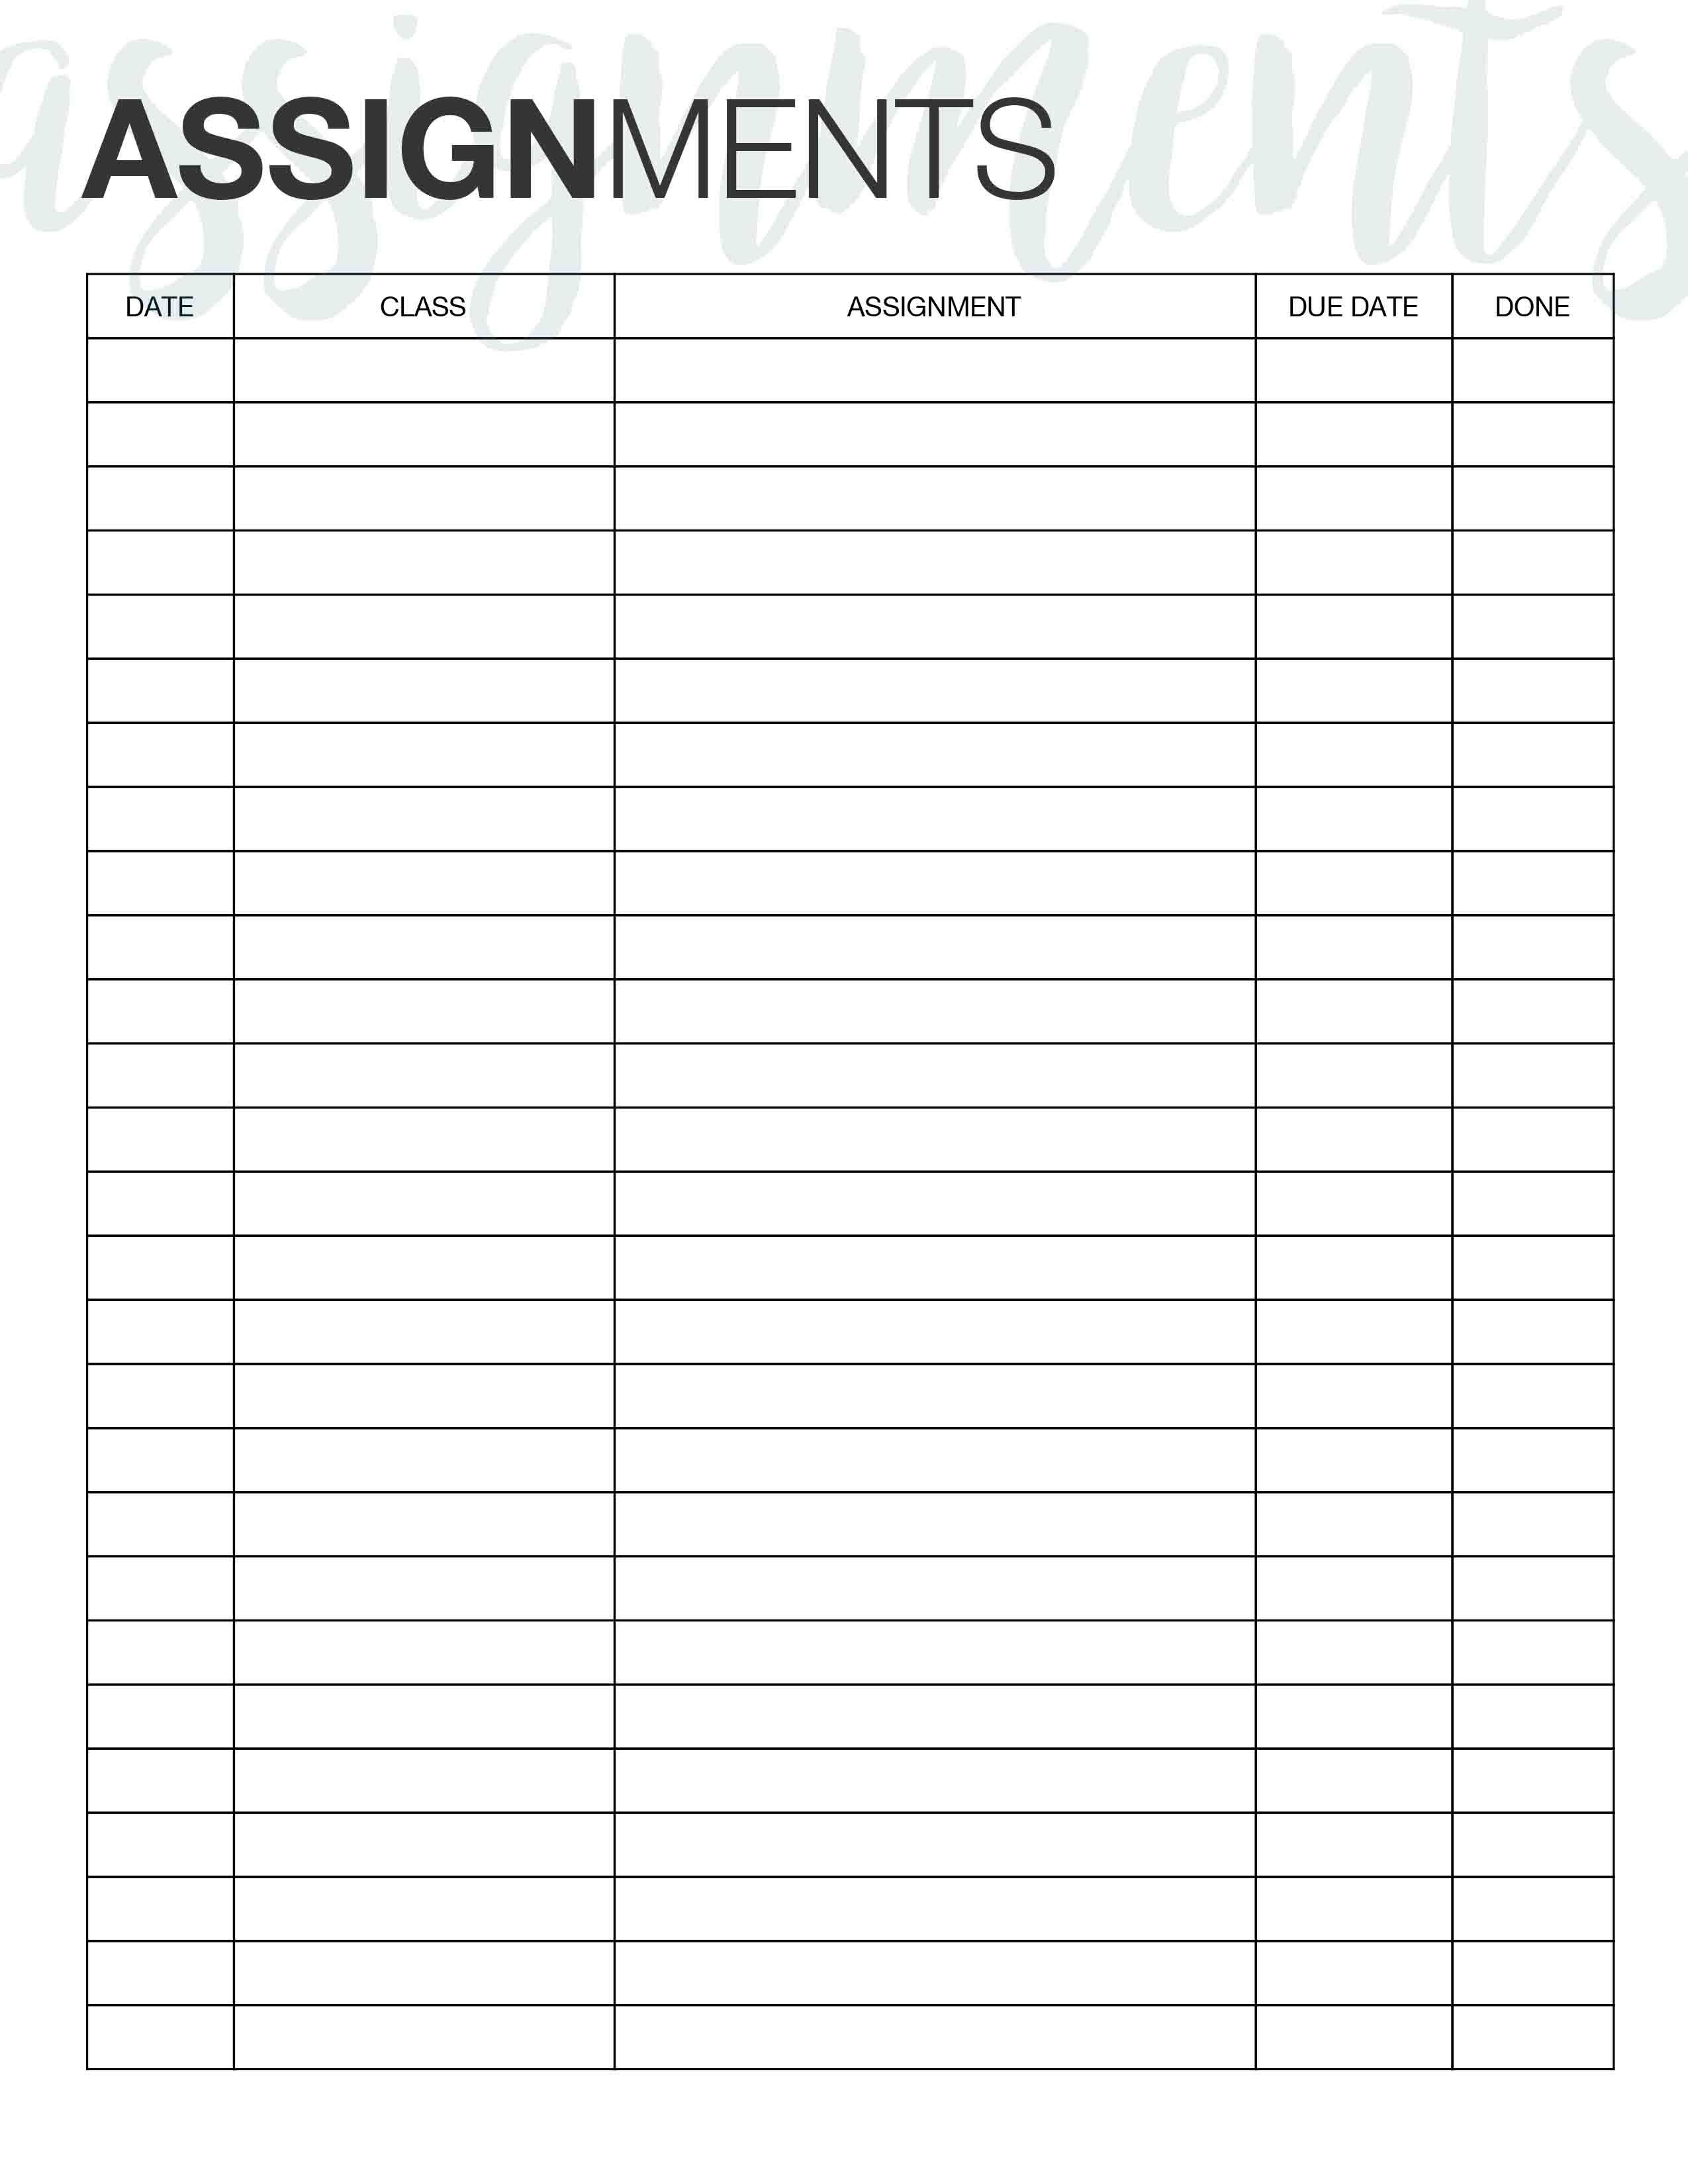 Assignment Tracker. Here&amp;#039;s A Simple Free Printable That You Can Use - Get Out Of Homework Free Pass Printable